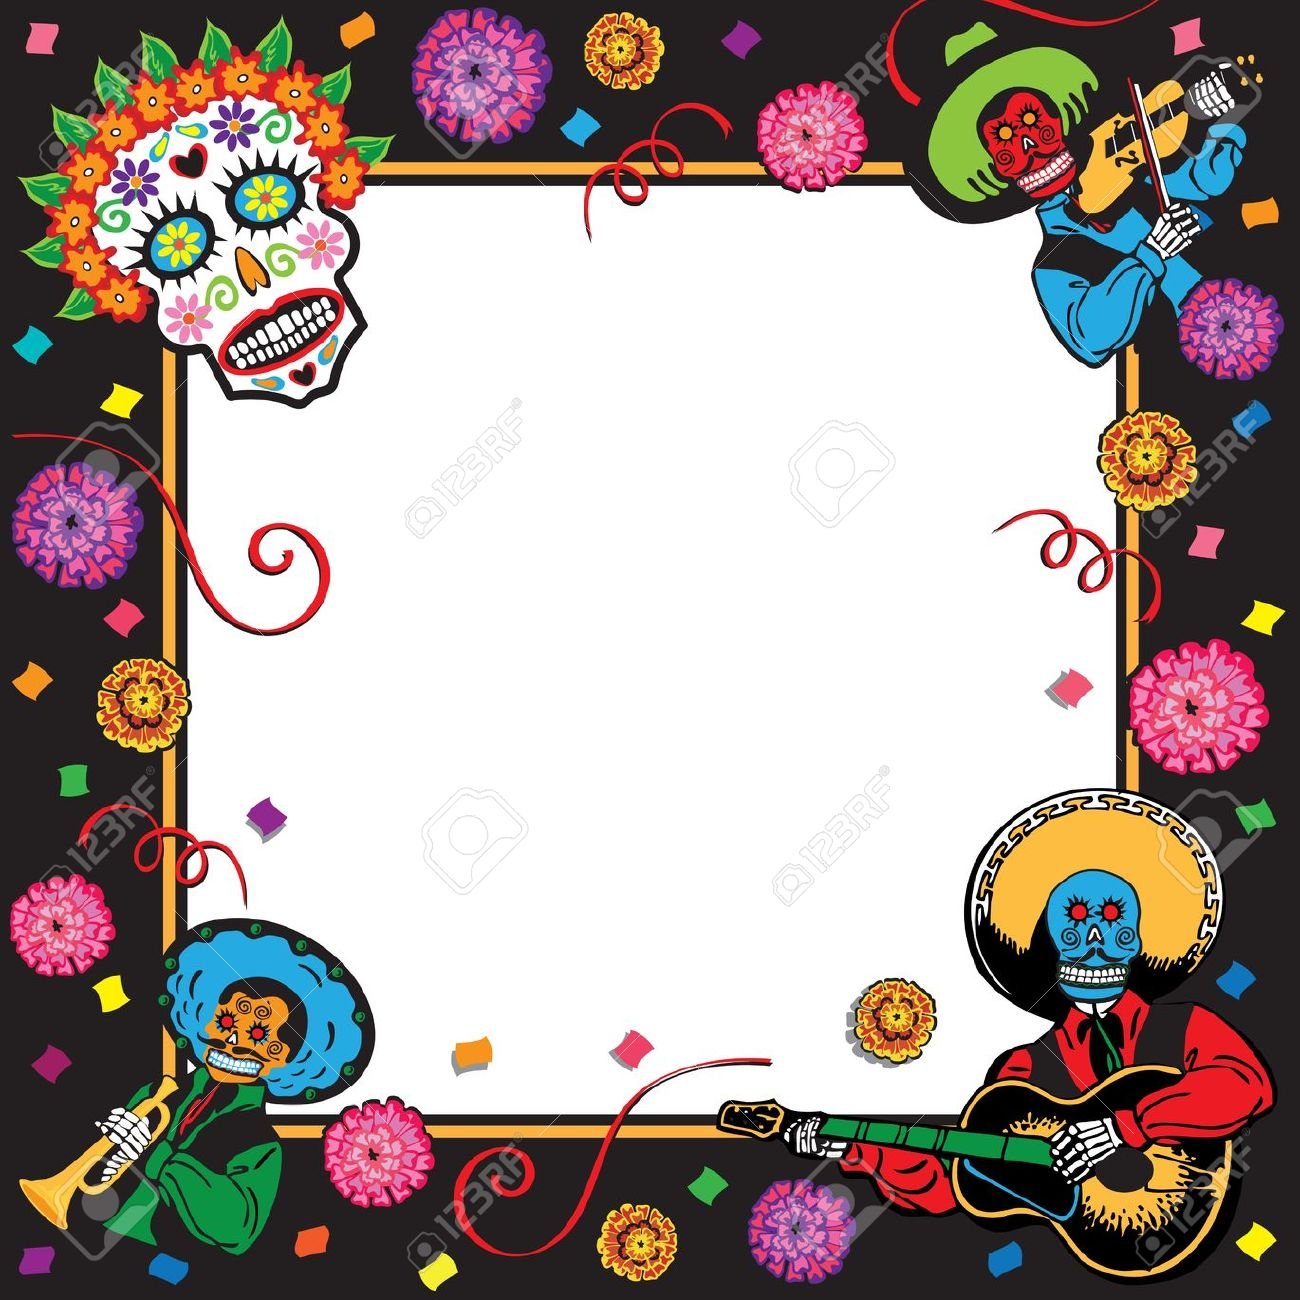 Day Of The Dead Party Invitation Royalty Free Cliparts, Vectors